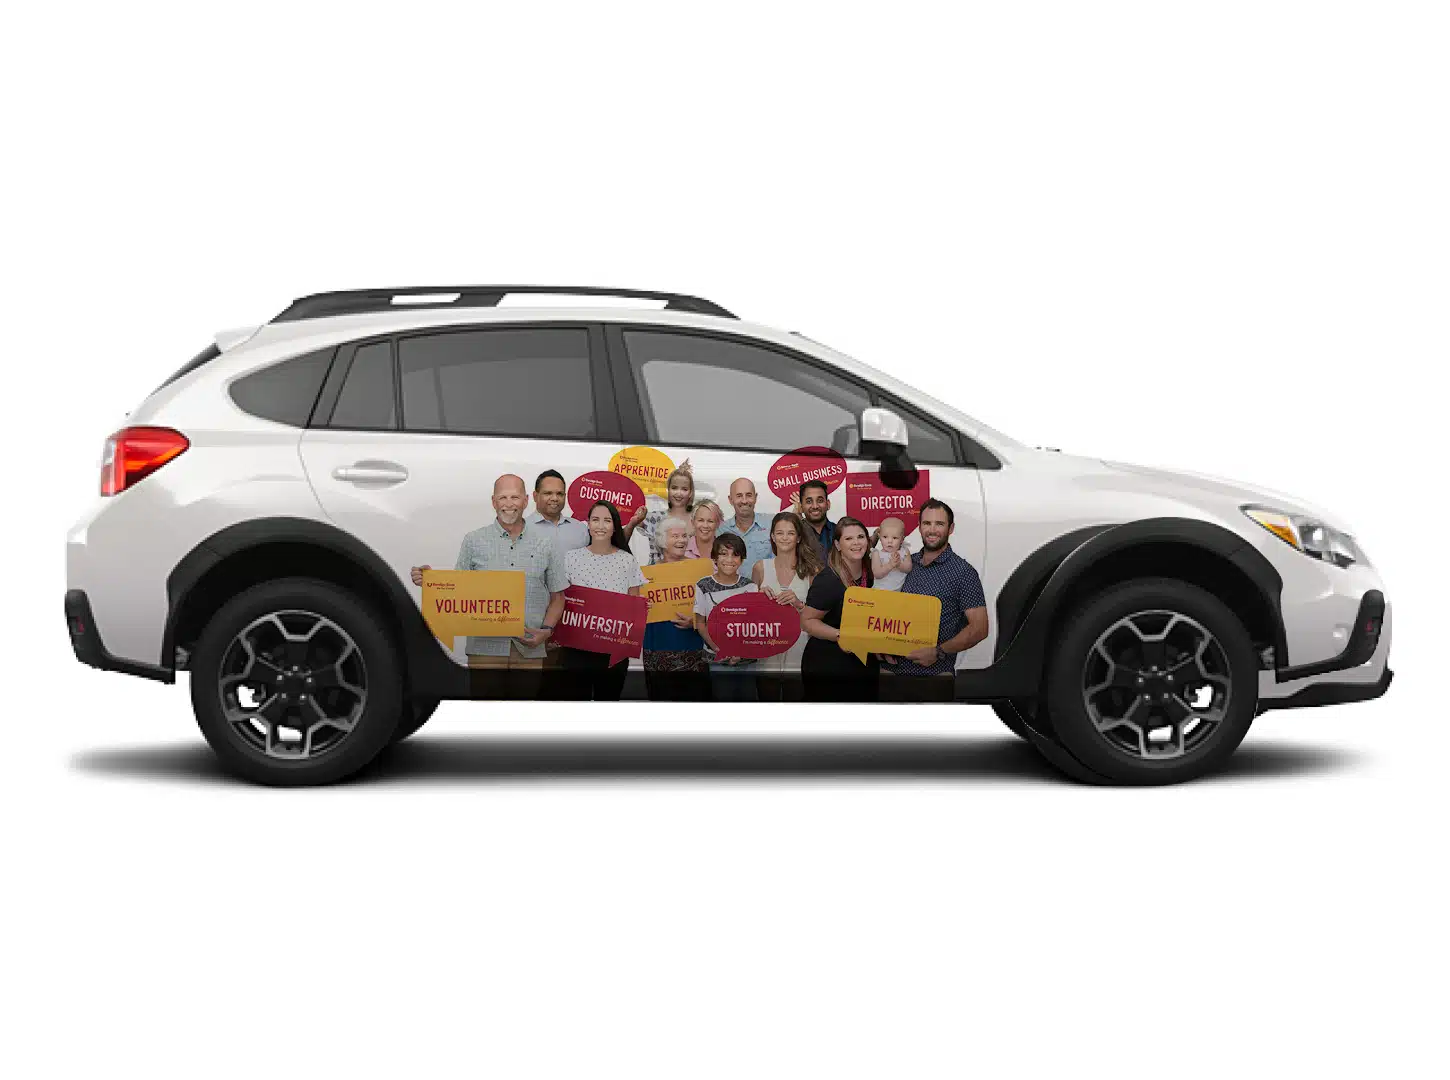 a car with a group of people on it